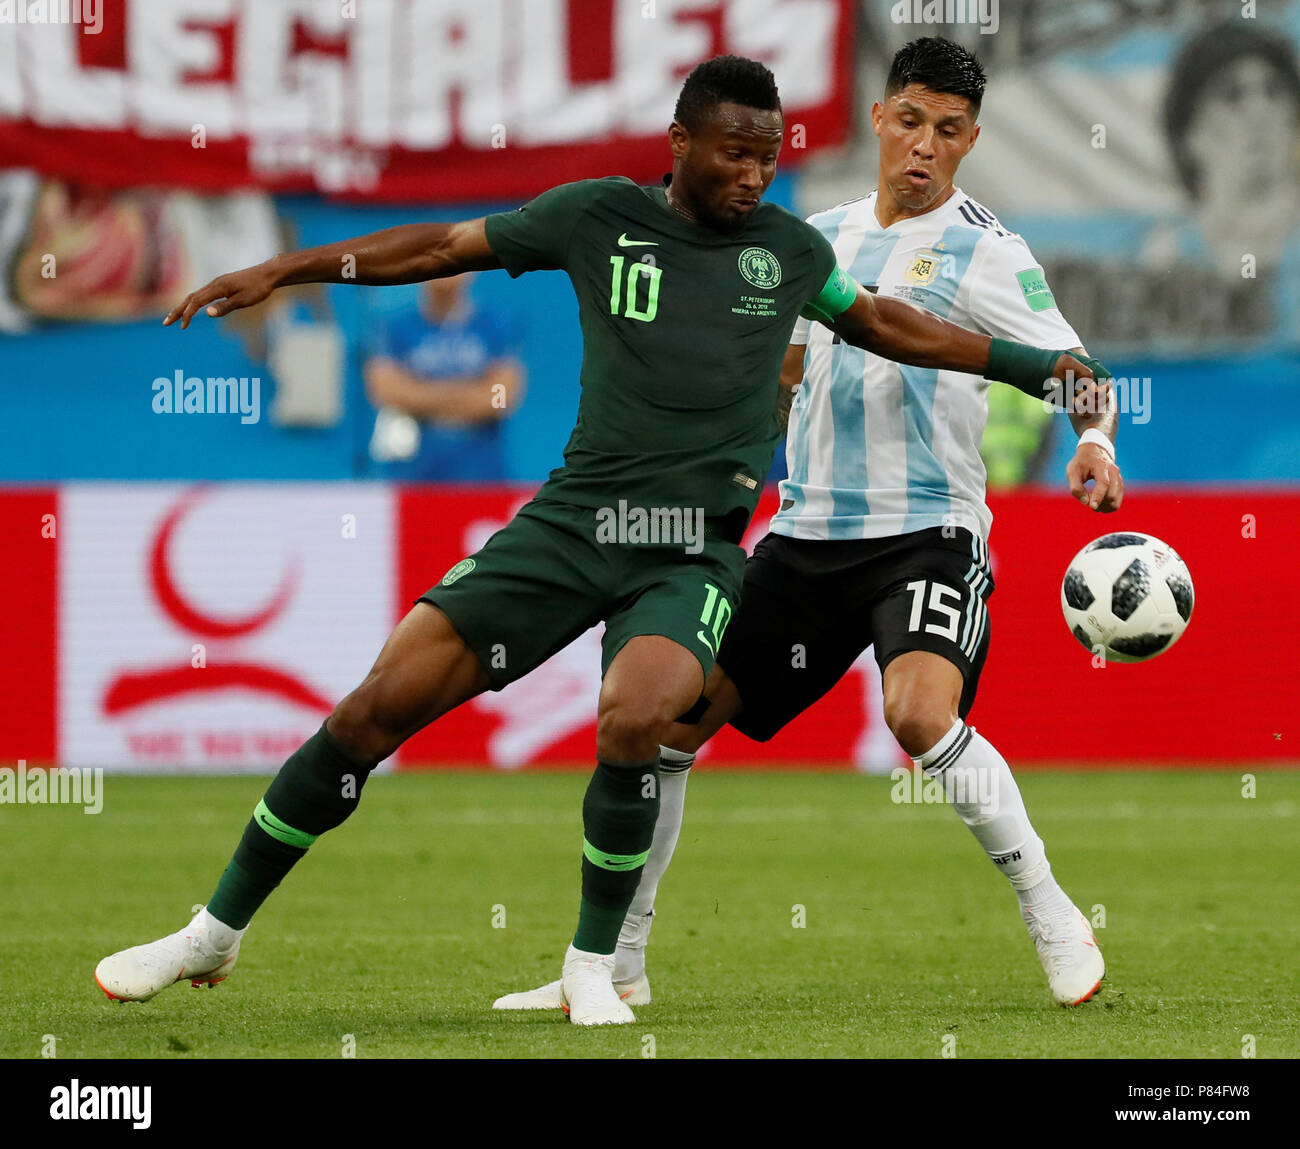 SAINT PETERSBURG, RUSSIA - JUNE 26: John Obi Mikel (L) of Nigeria national team and Enzo Perez of Argentina national team vie for the ball during the 2018 FIFA World Cup Russia group D match between Nigeria and Argentina at Saint Petersburg Stadium on June 26, 2018 in Saint Petersburg, Russia. (MB Media) Stock Photo